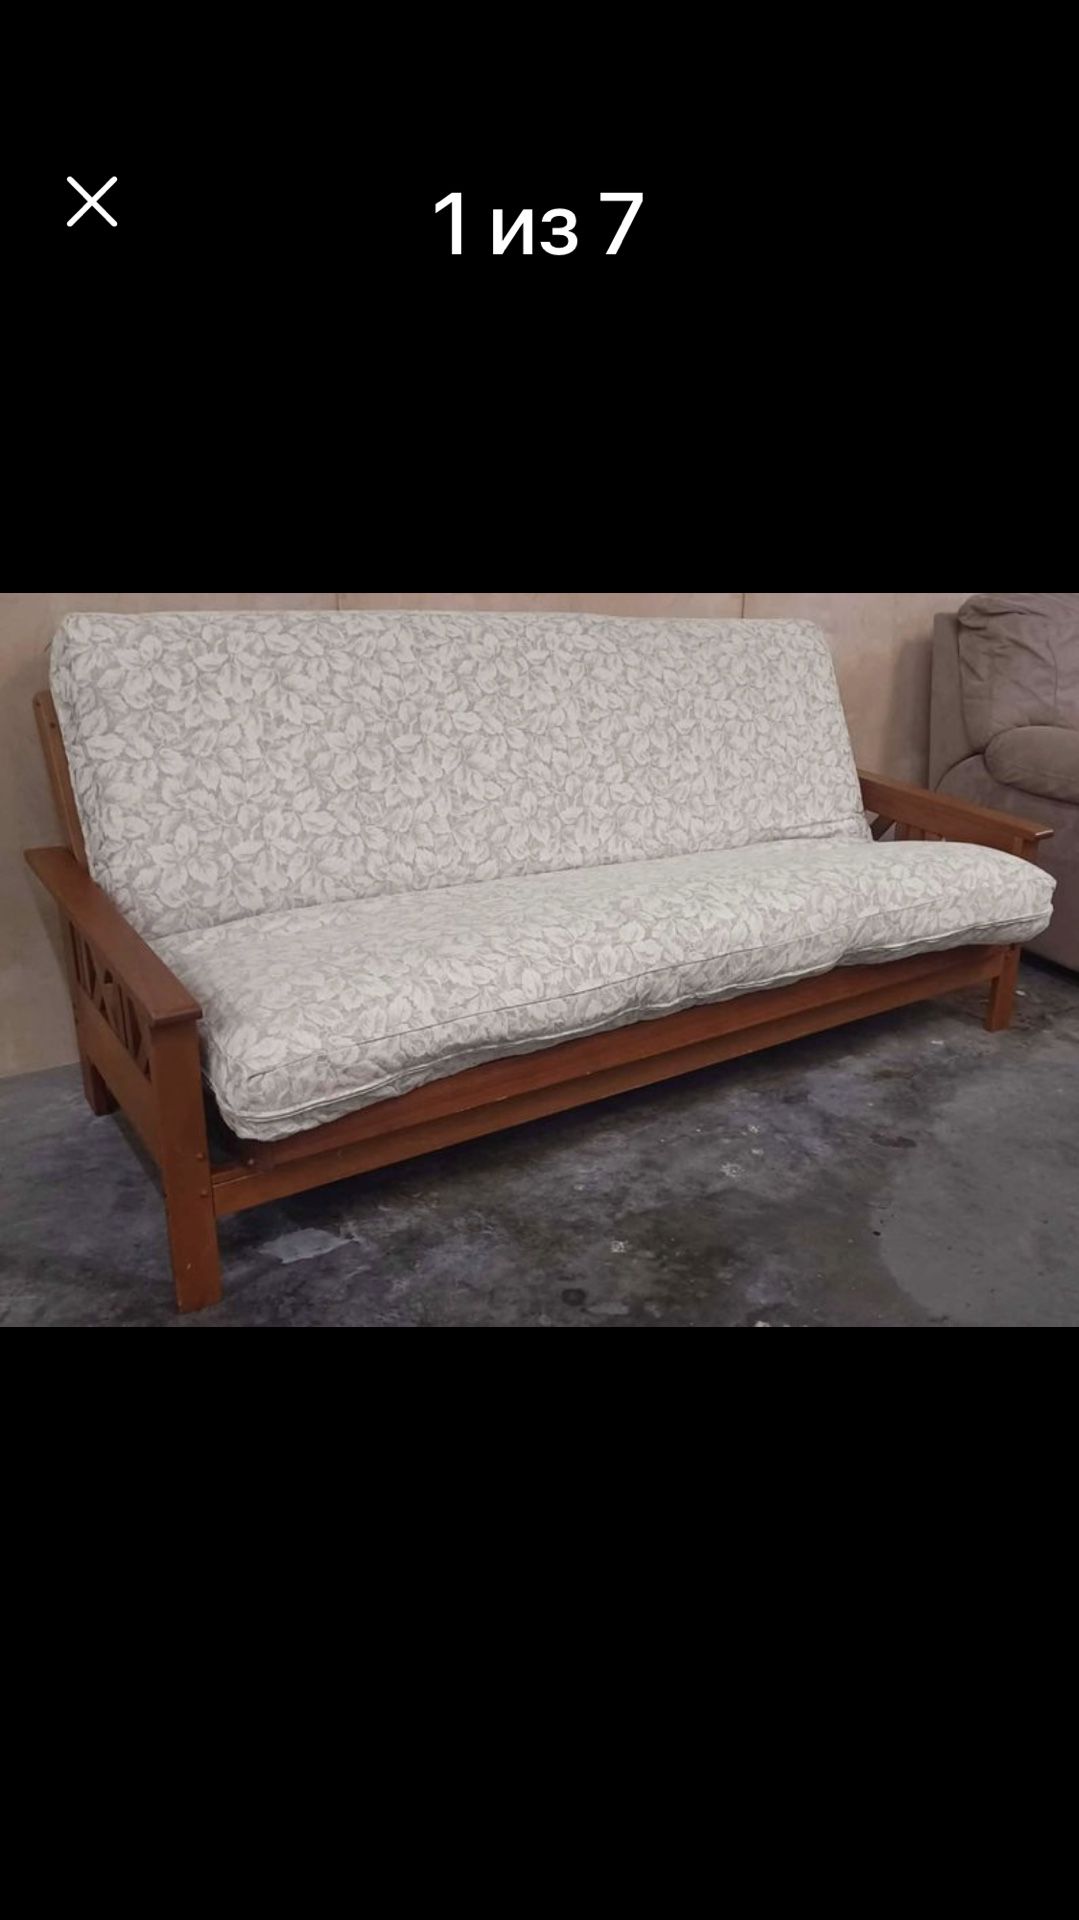 $200 Couch/Bed Sofa Wood with Fabric Mattress 